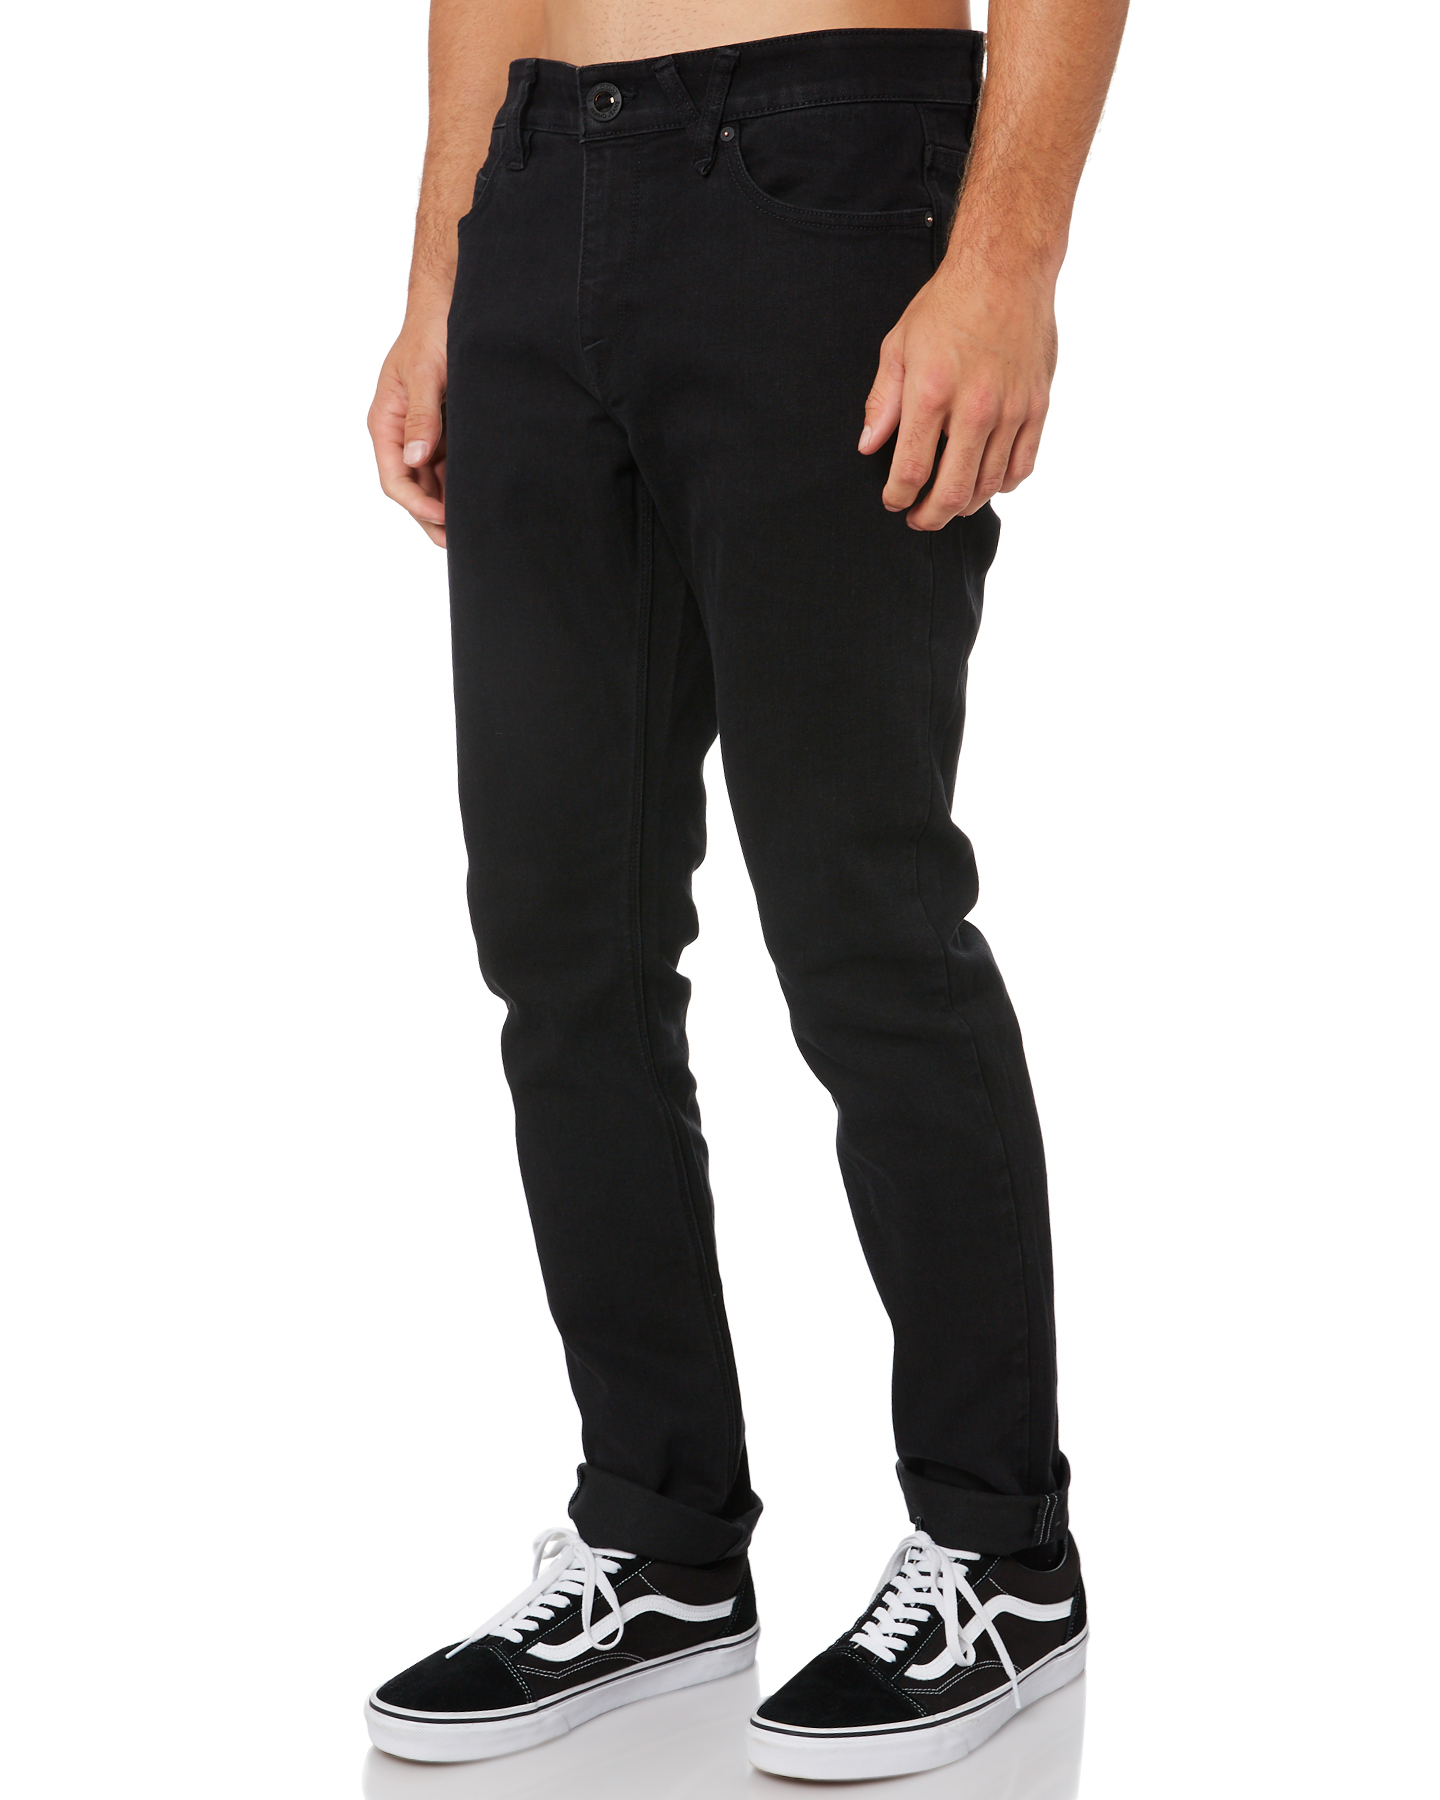 Volcom Solver Tapered Mens Jean - Black Out | SurfStitch